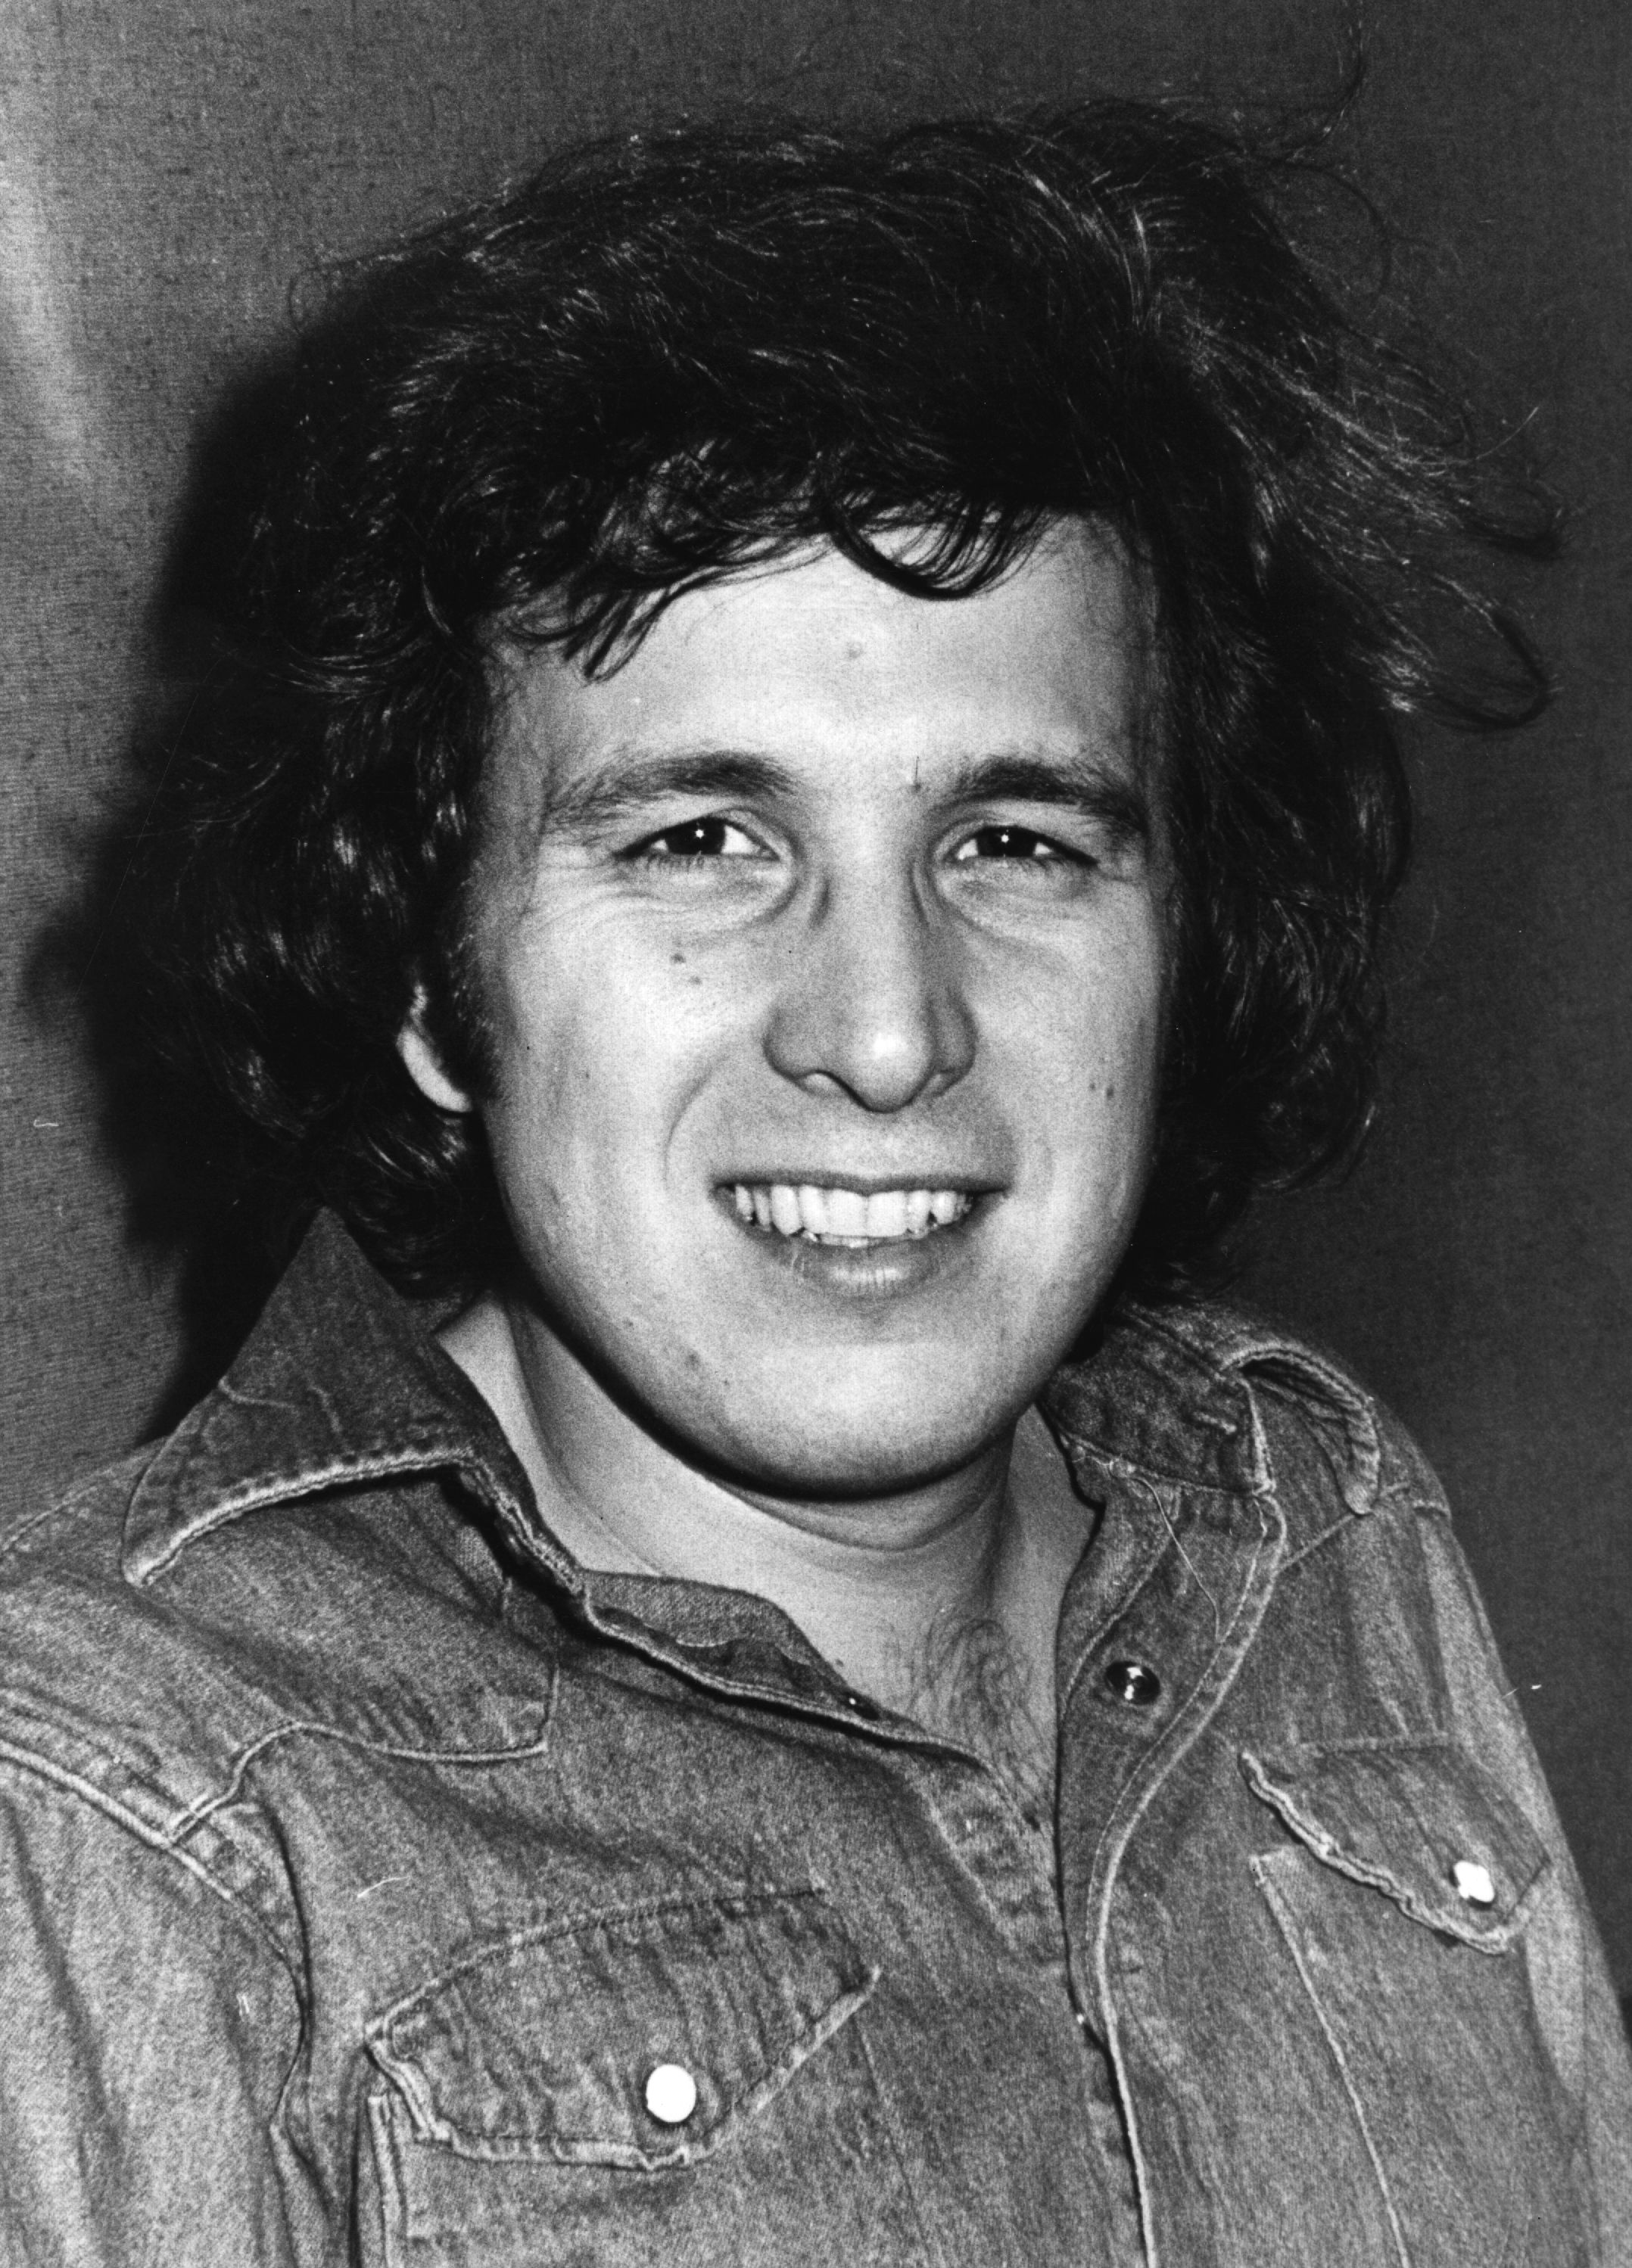 Don McLean's taken on May 28, 1975 | Source: Getty Images